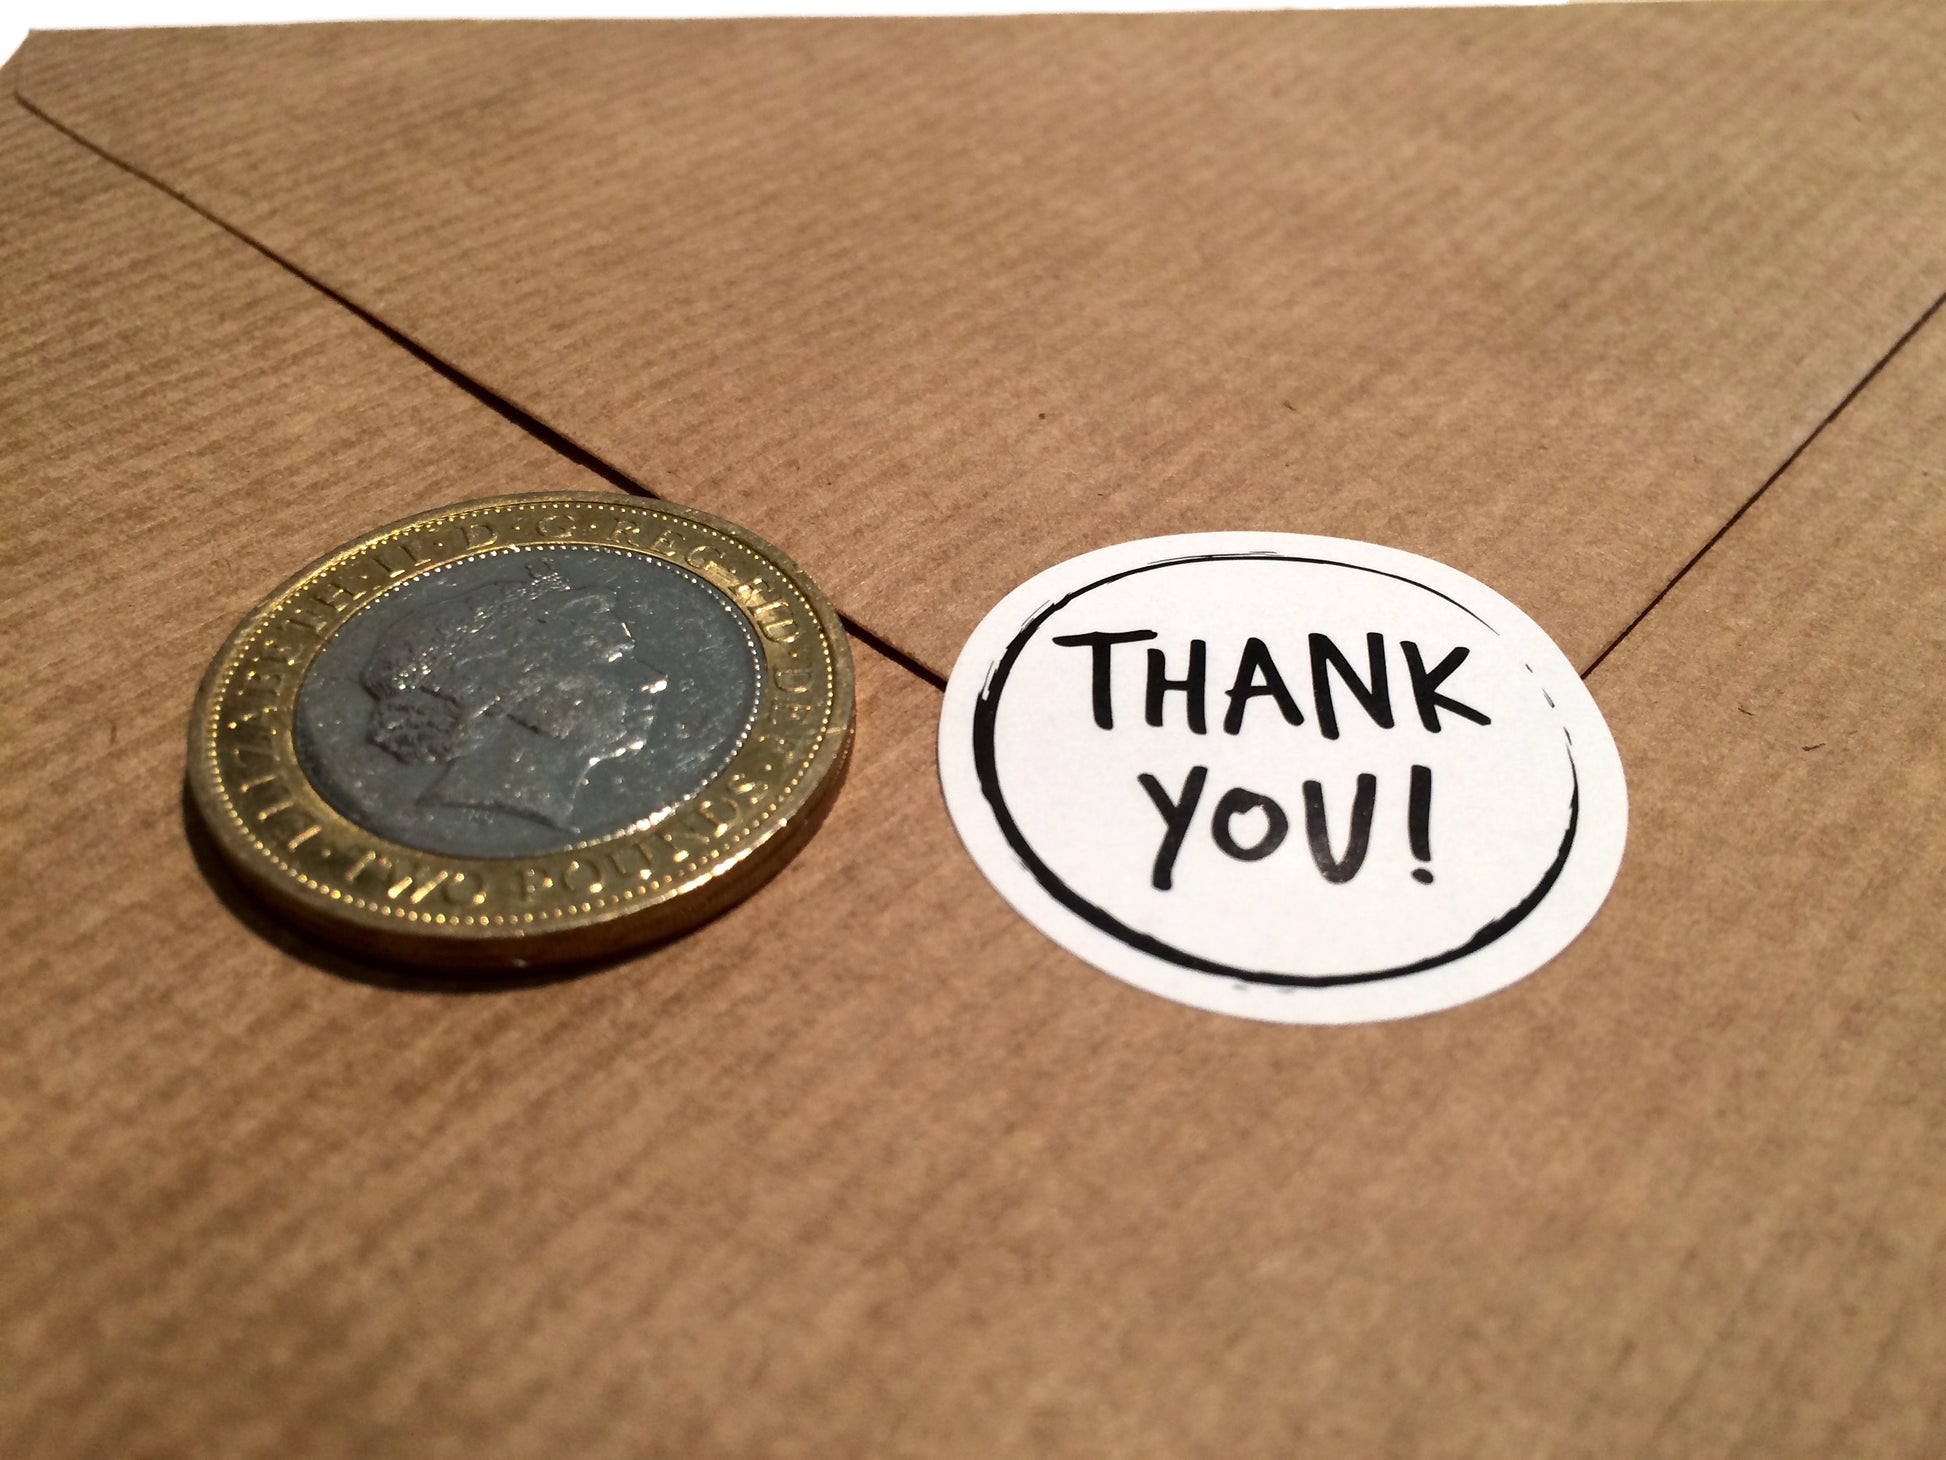 Size comparison thank you sticker and £2 coin